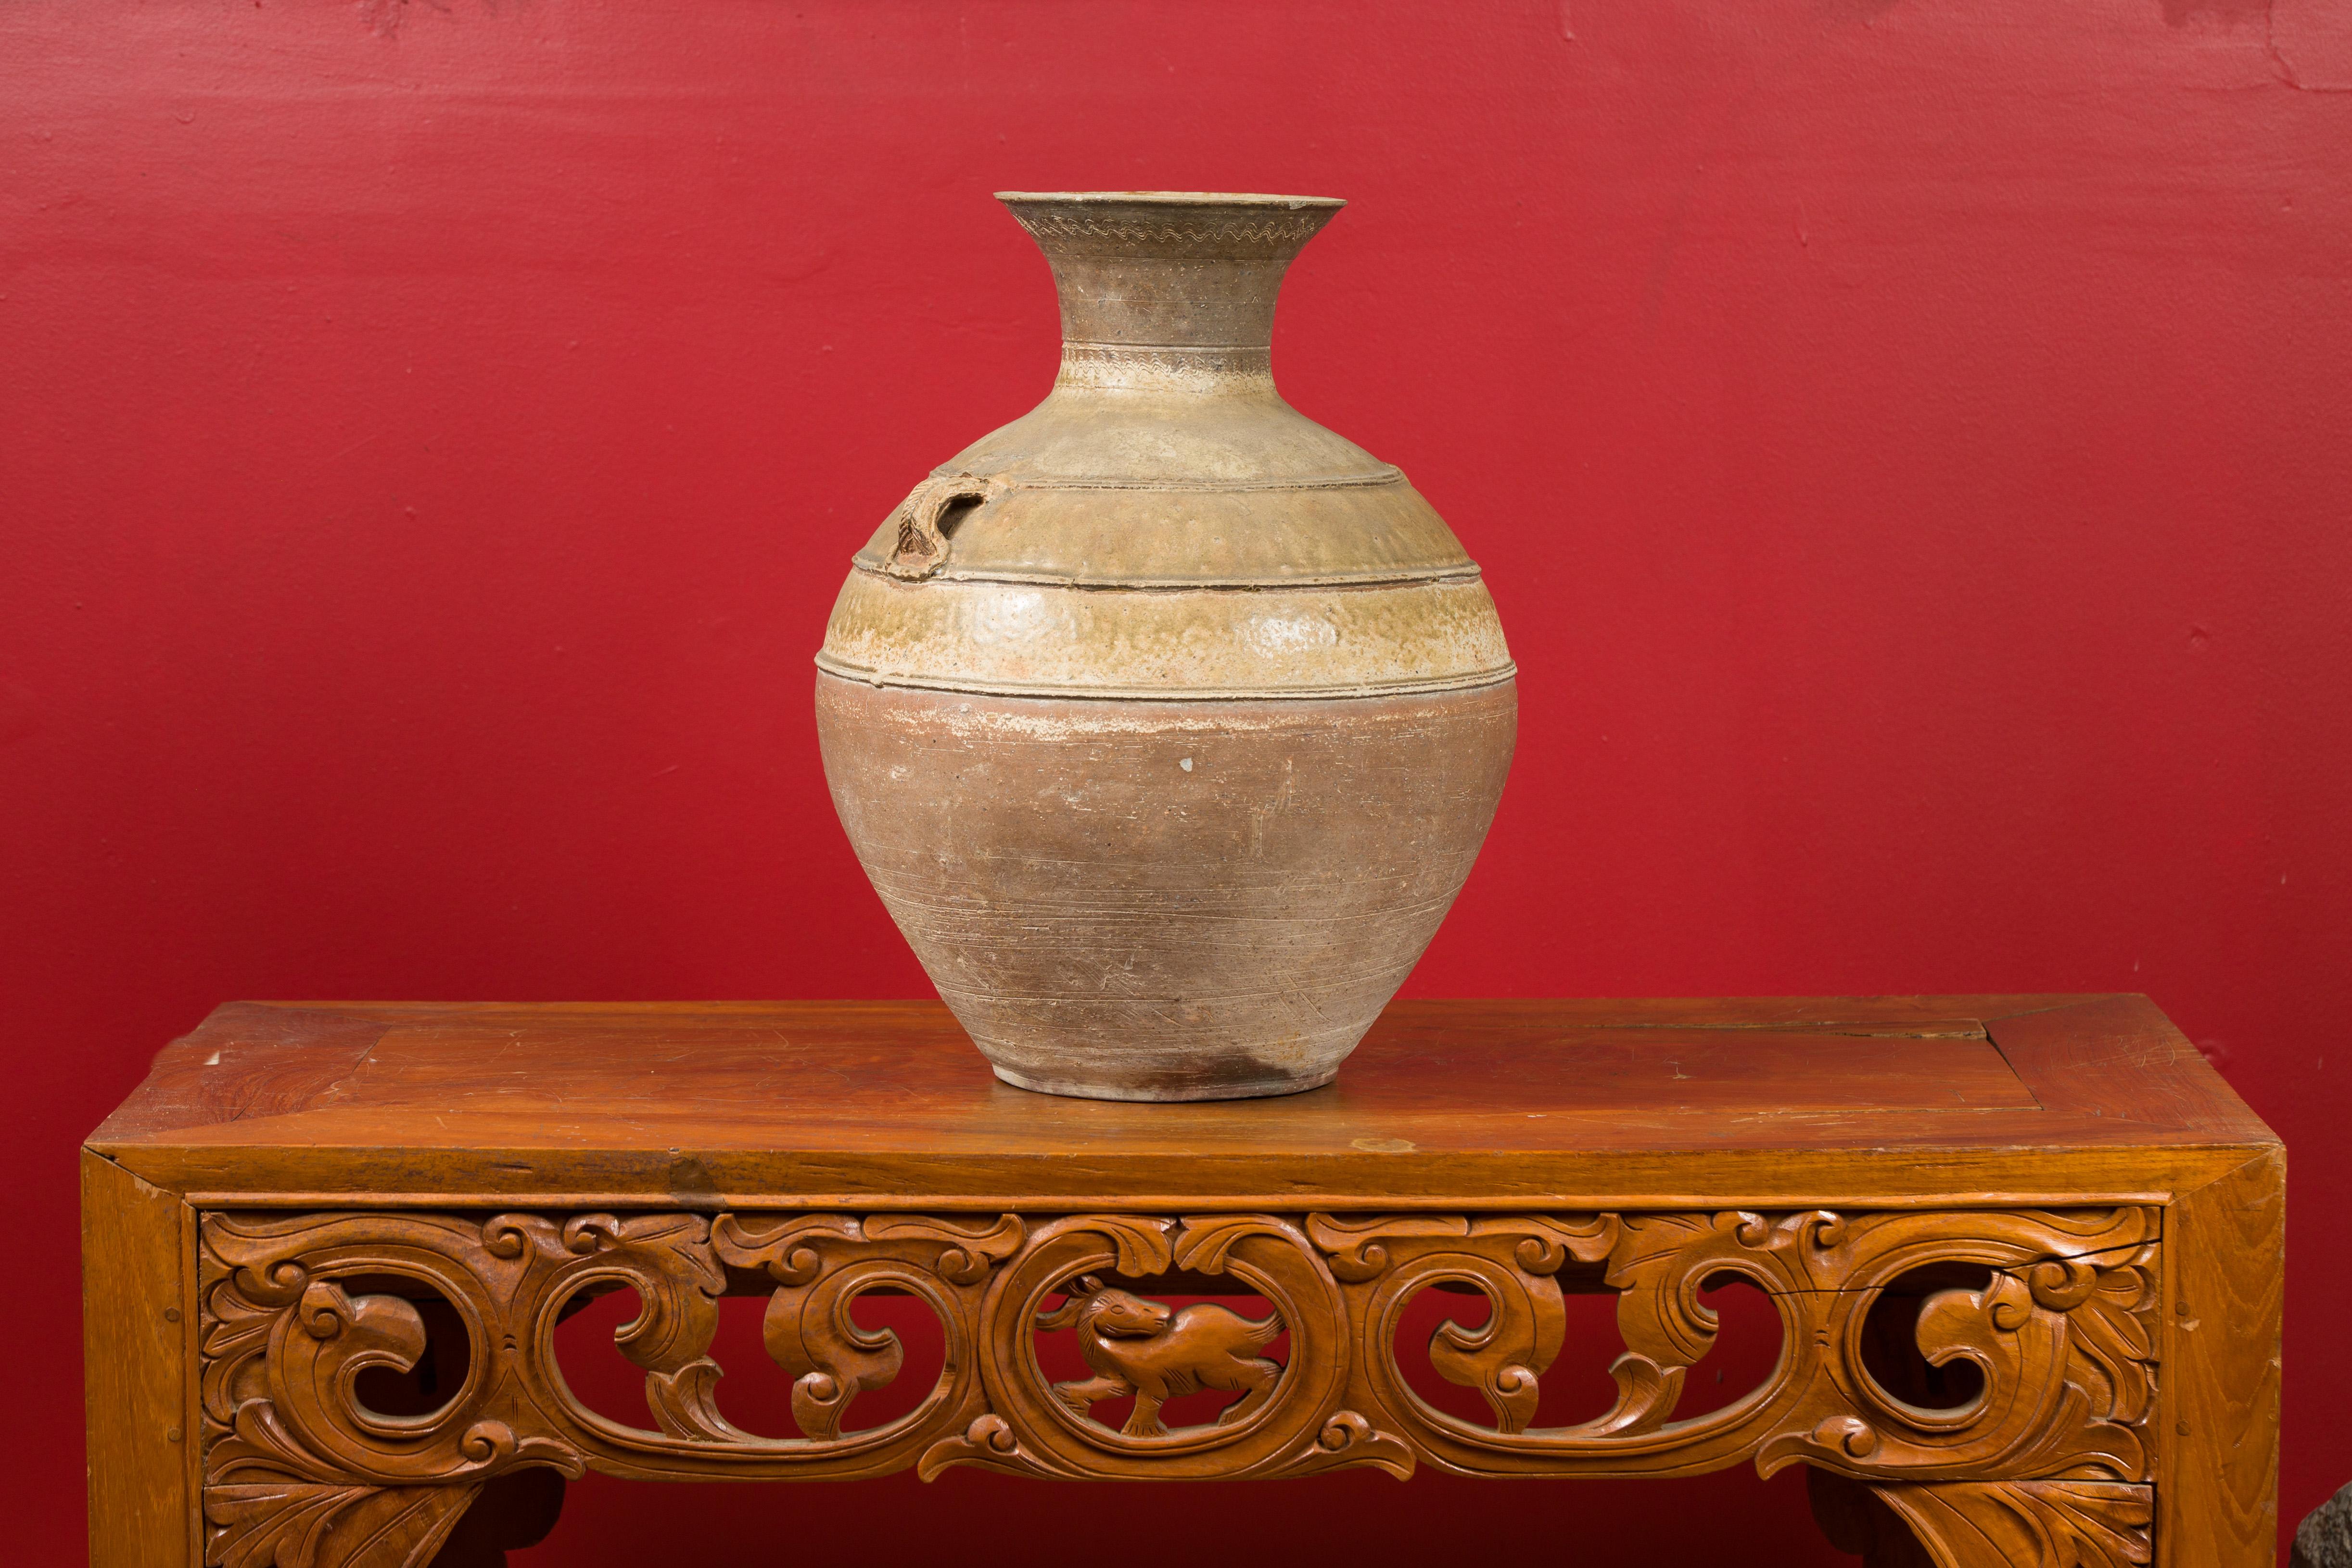 Chinese Han Dynasty Glazed Hu Vessel with Petite Handles, circa 202 BC-200 AD For Sale 3